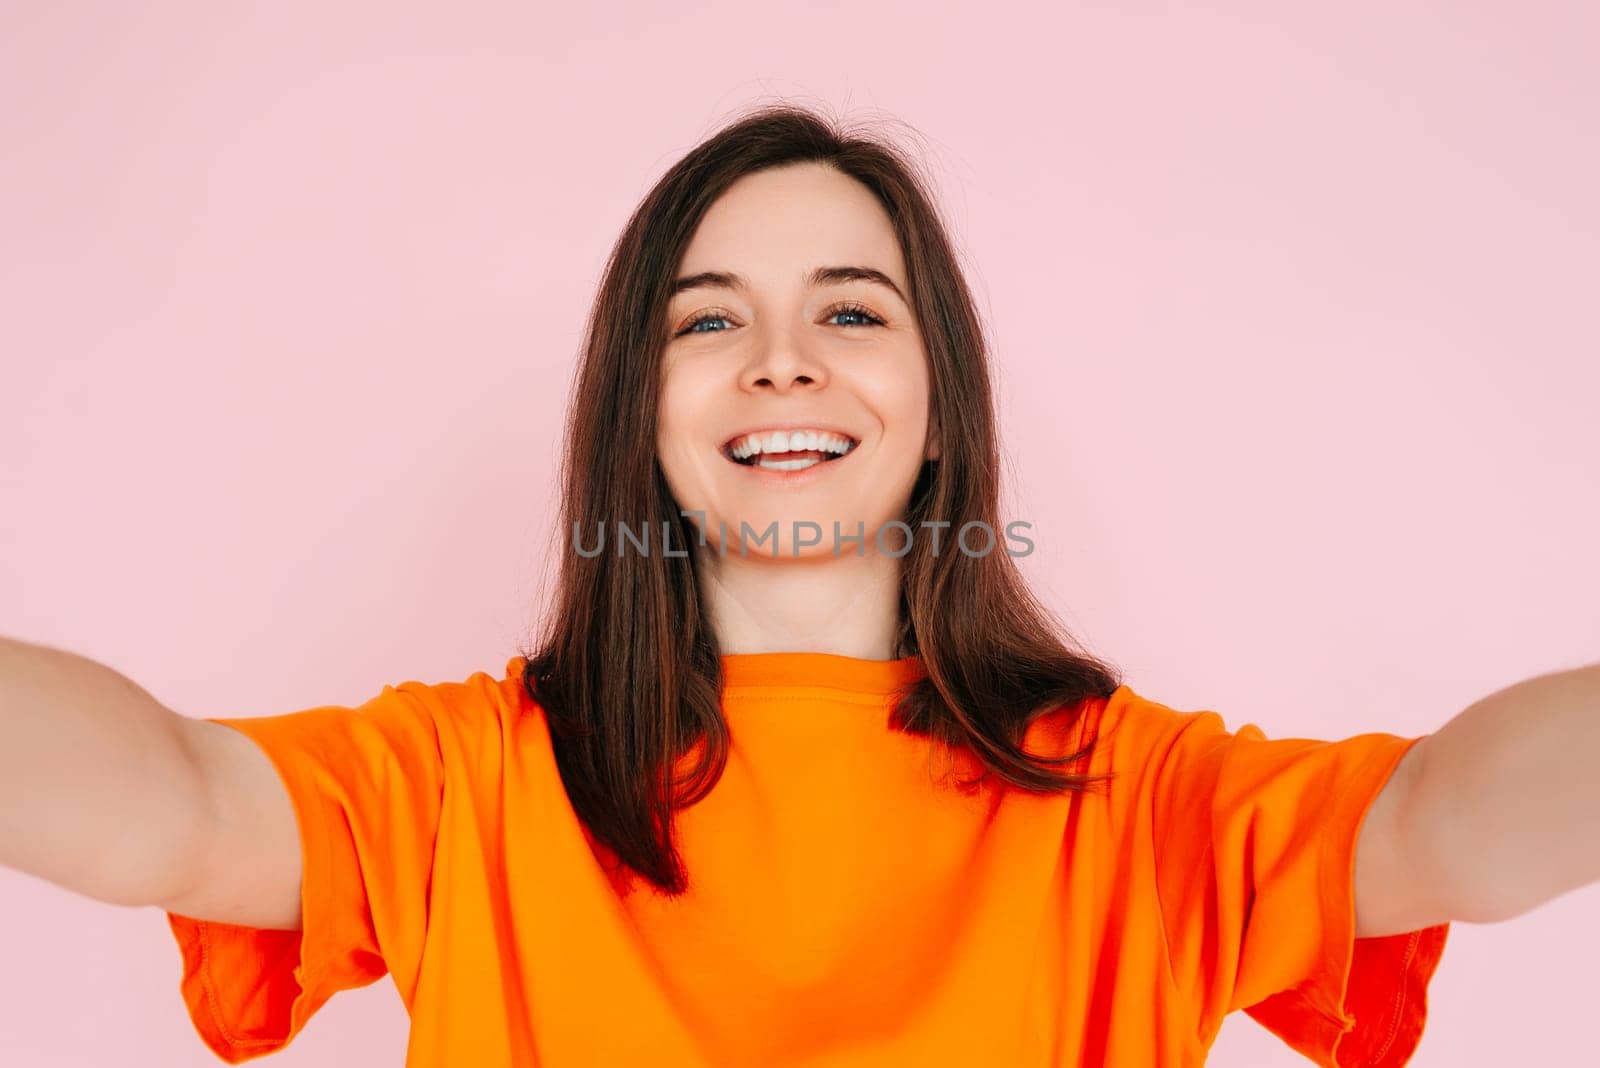 Vibrant Social Media Storytelling: Beautiful and Joyful Woman in Colorful Attire, Recording Instagram Twitter Post - Influencer and Informant Concept, Isolated on Pink Background. by ViShark